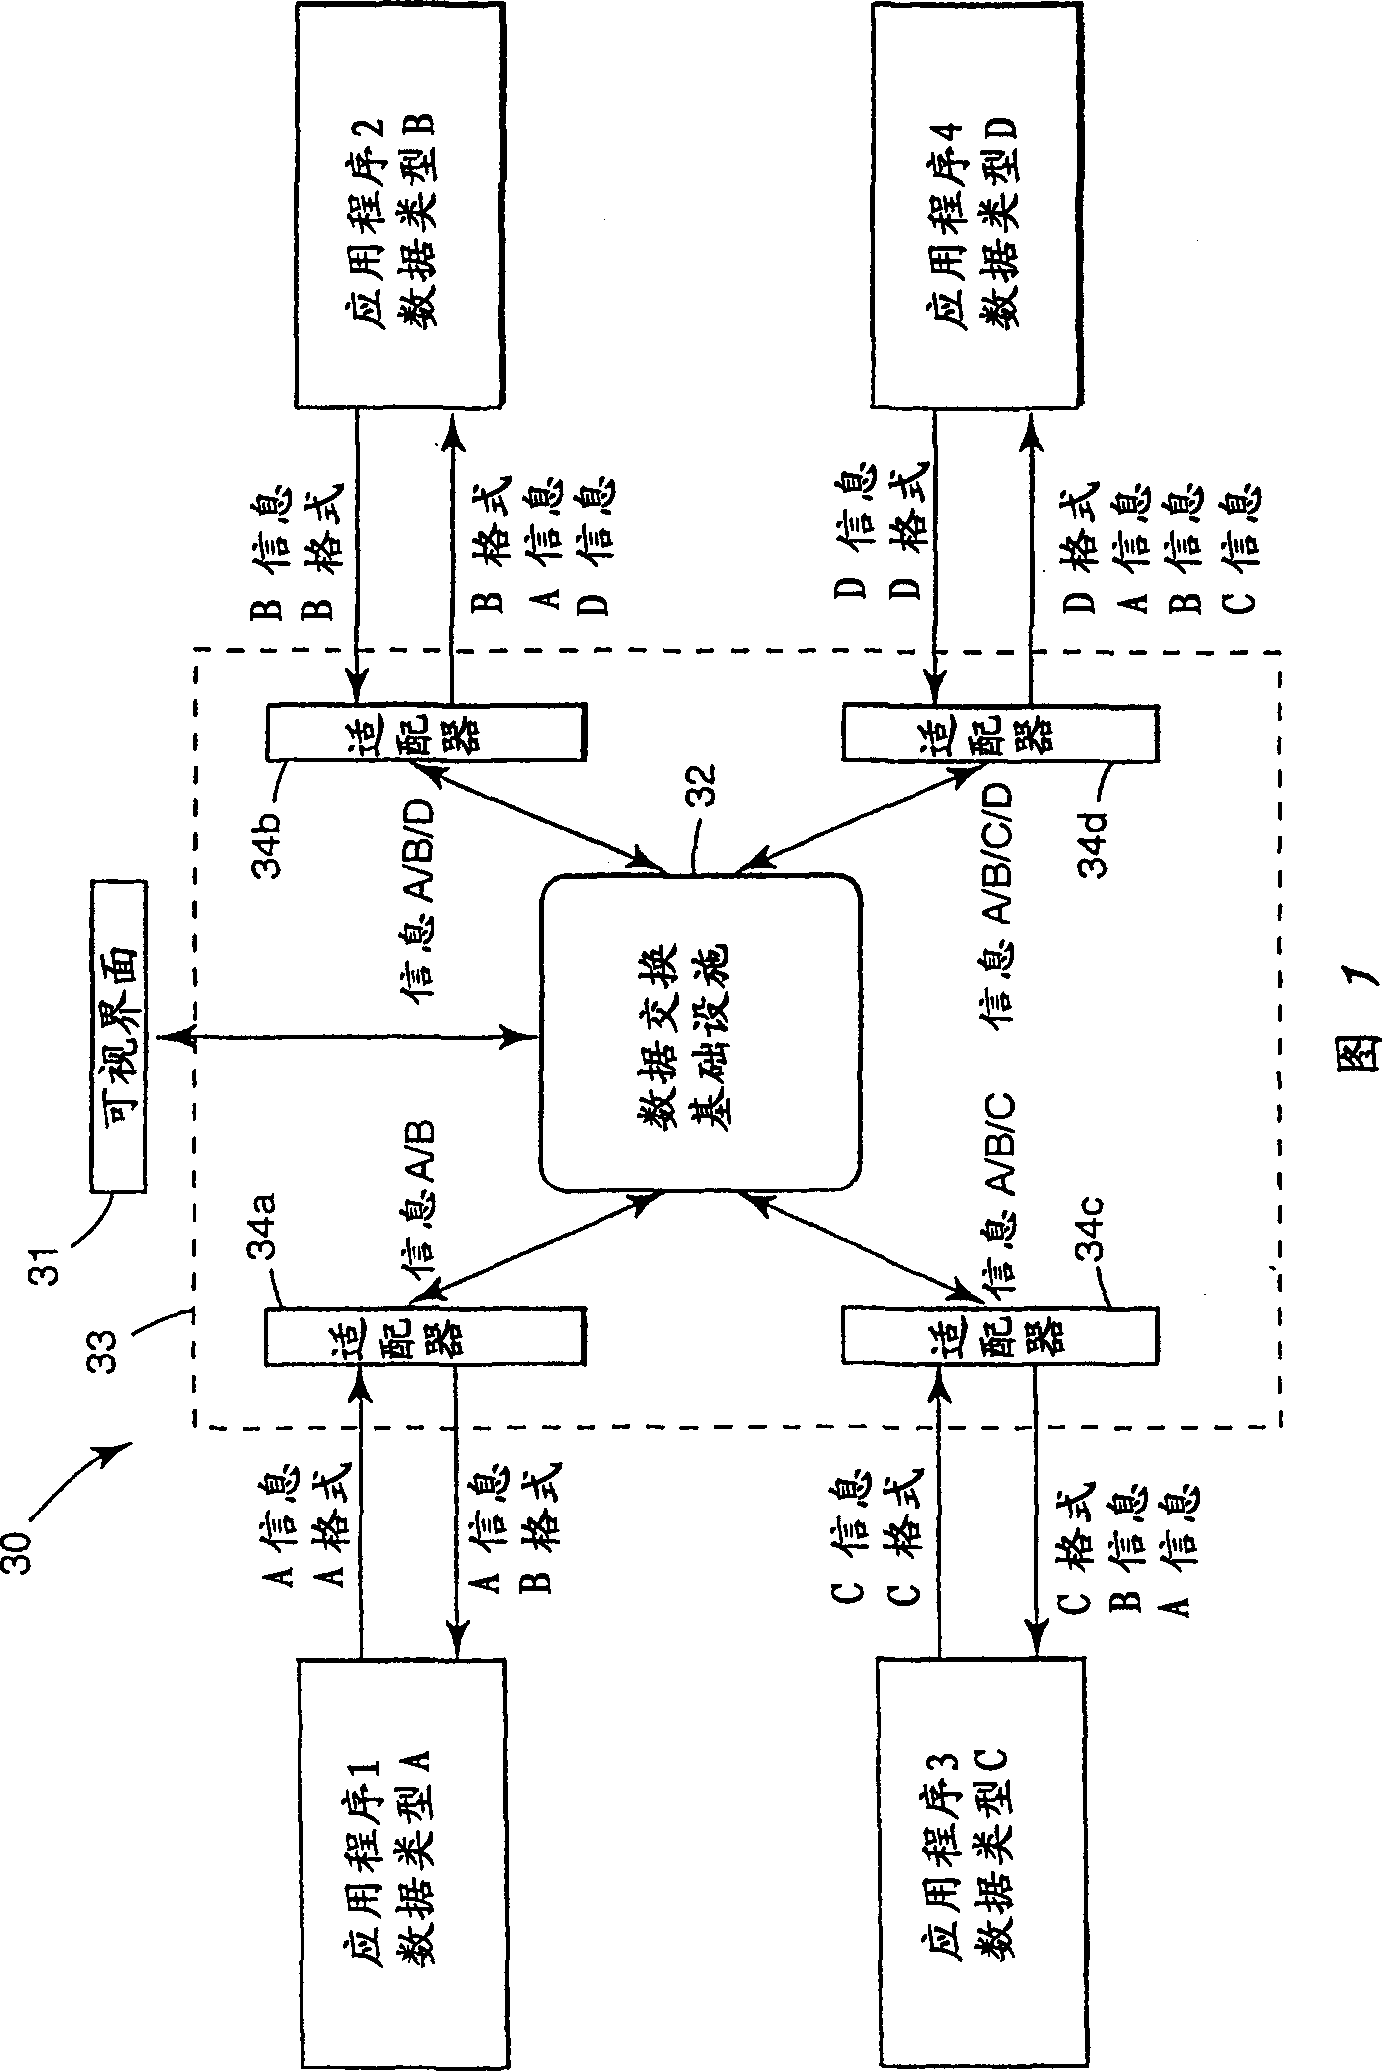 Visual data integration system and method